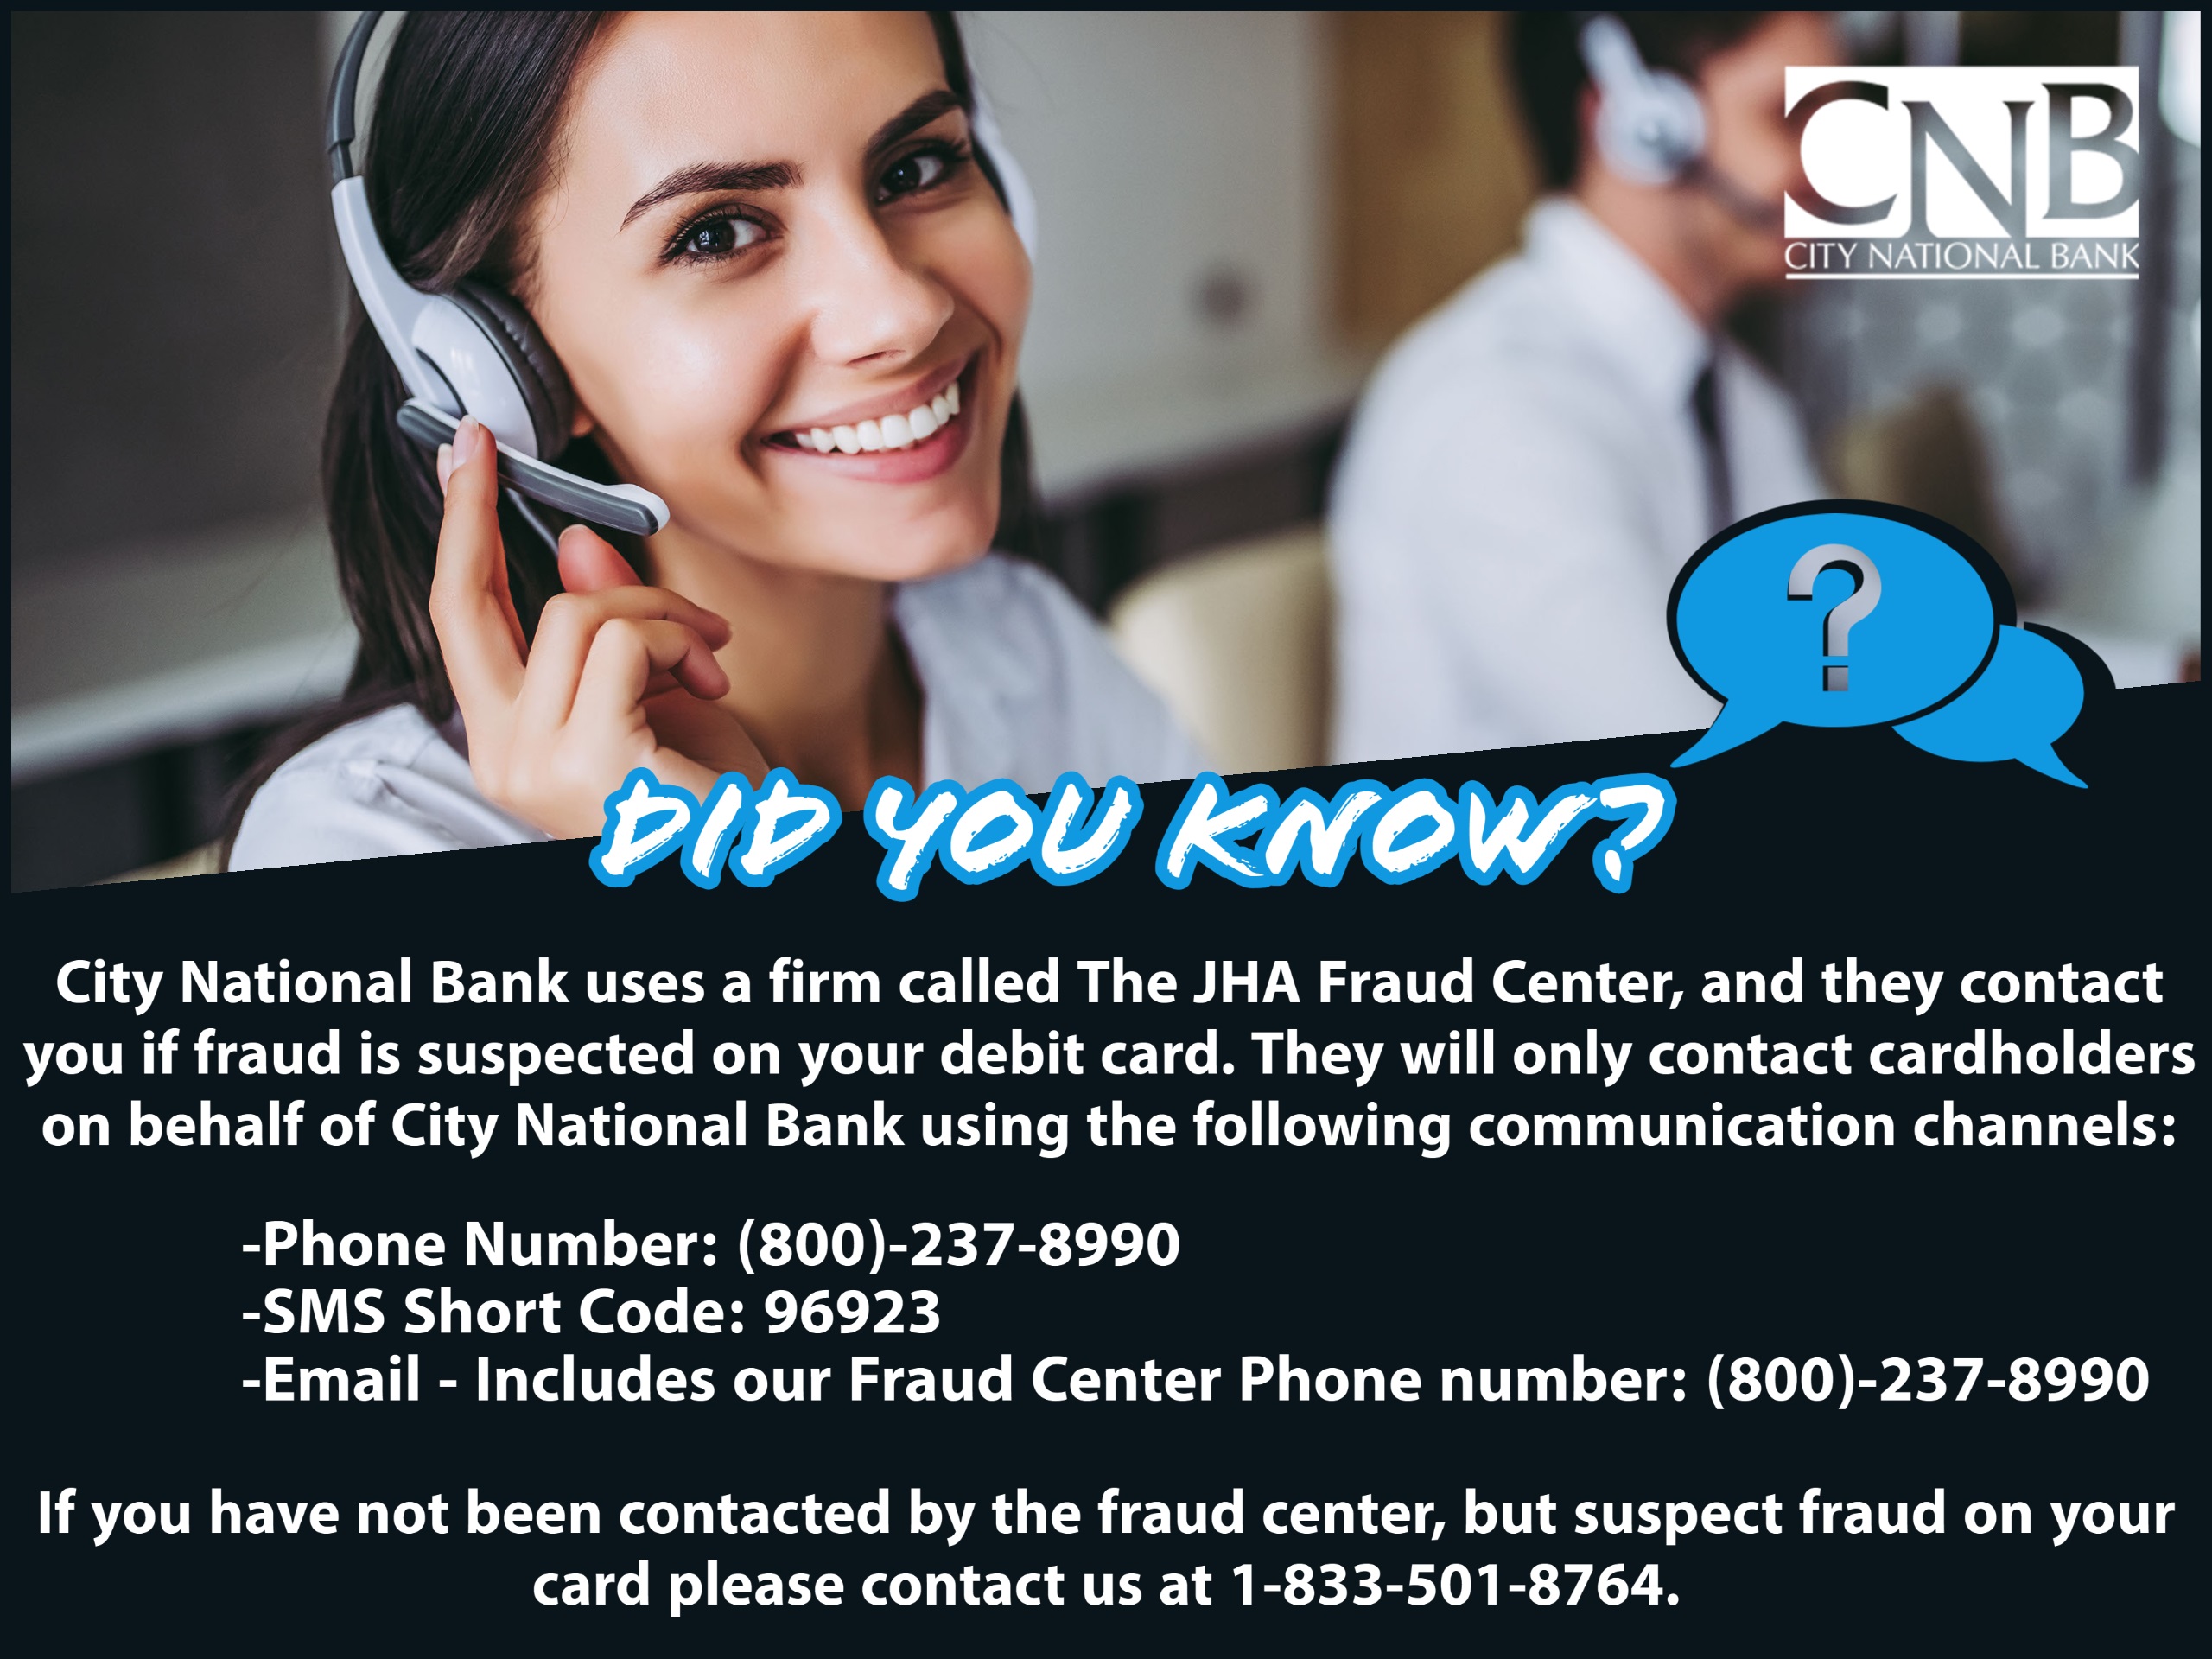 "did you know" graphic explaining the JHA Fraud Center